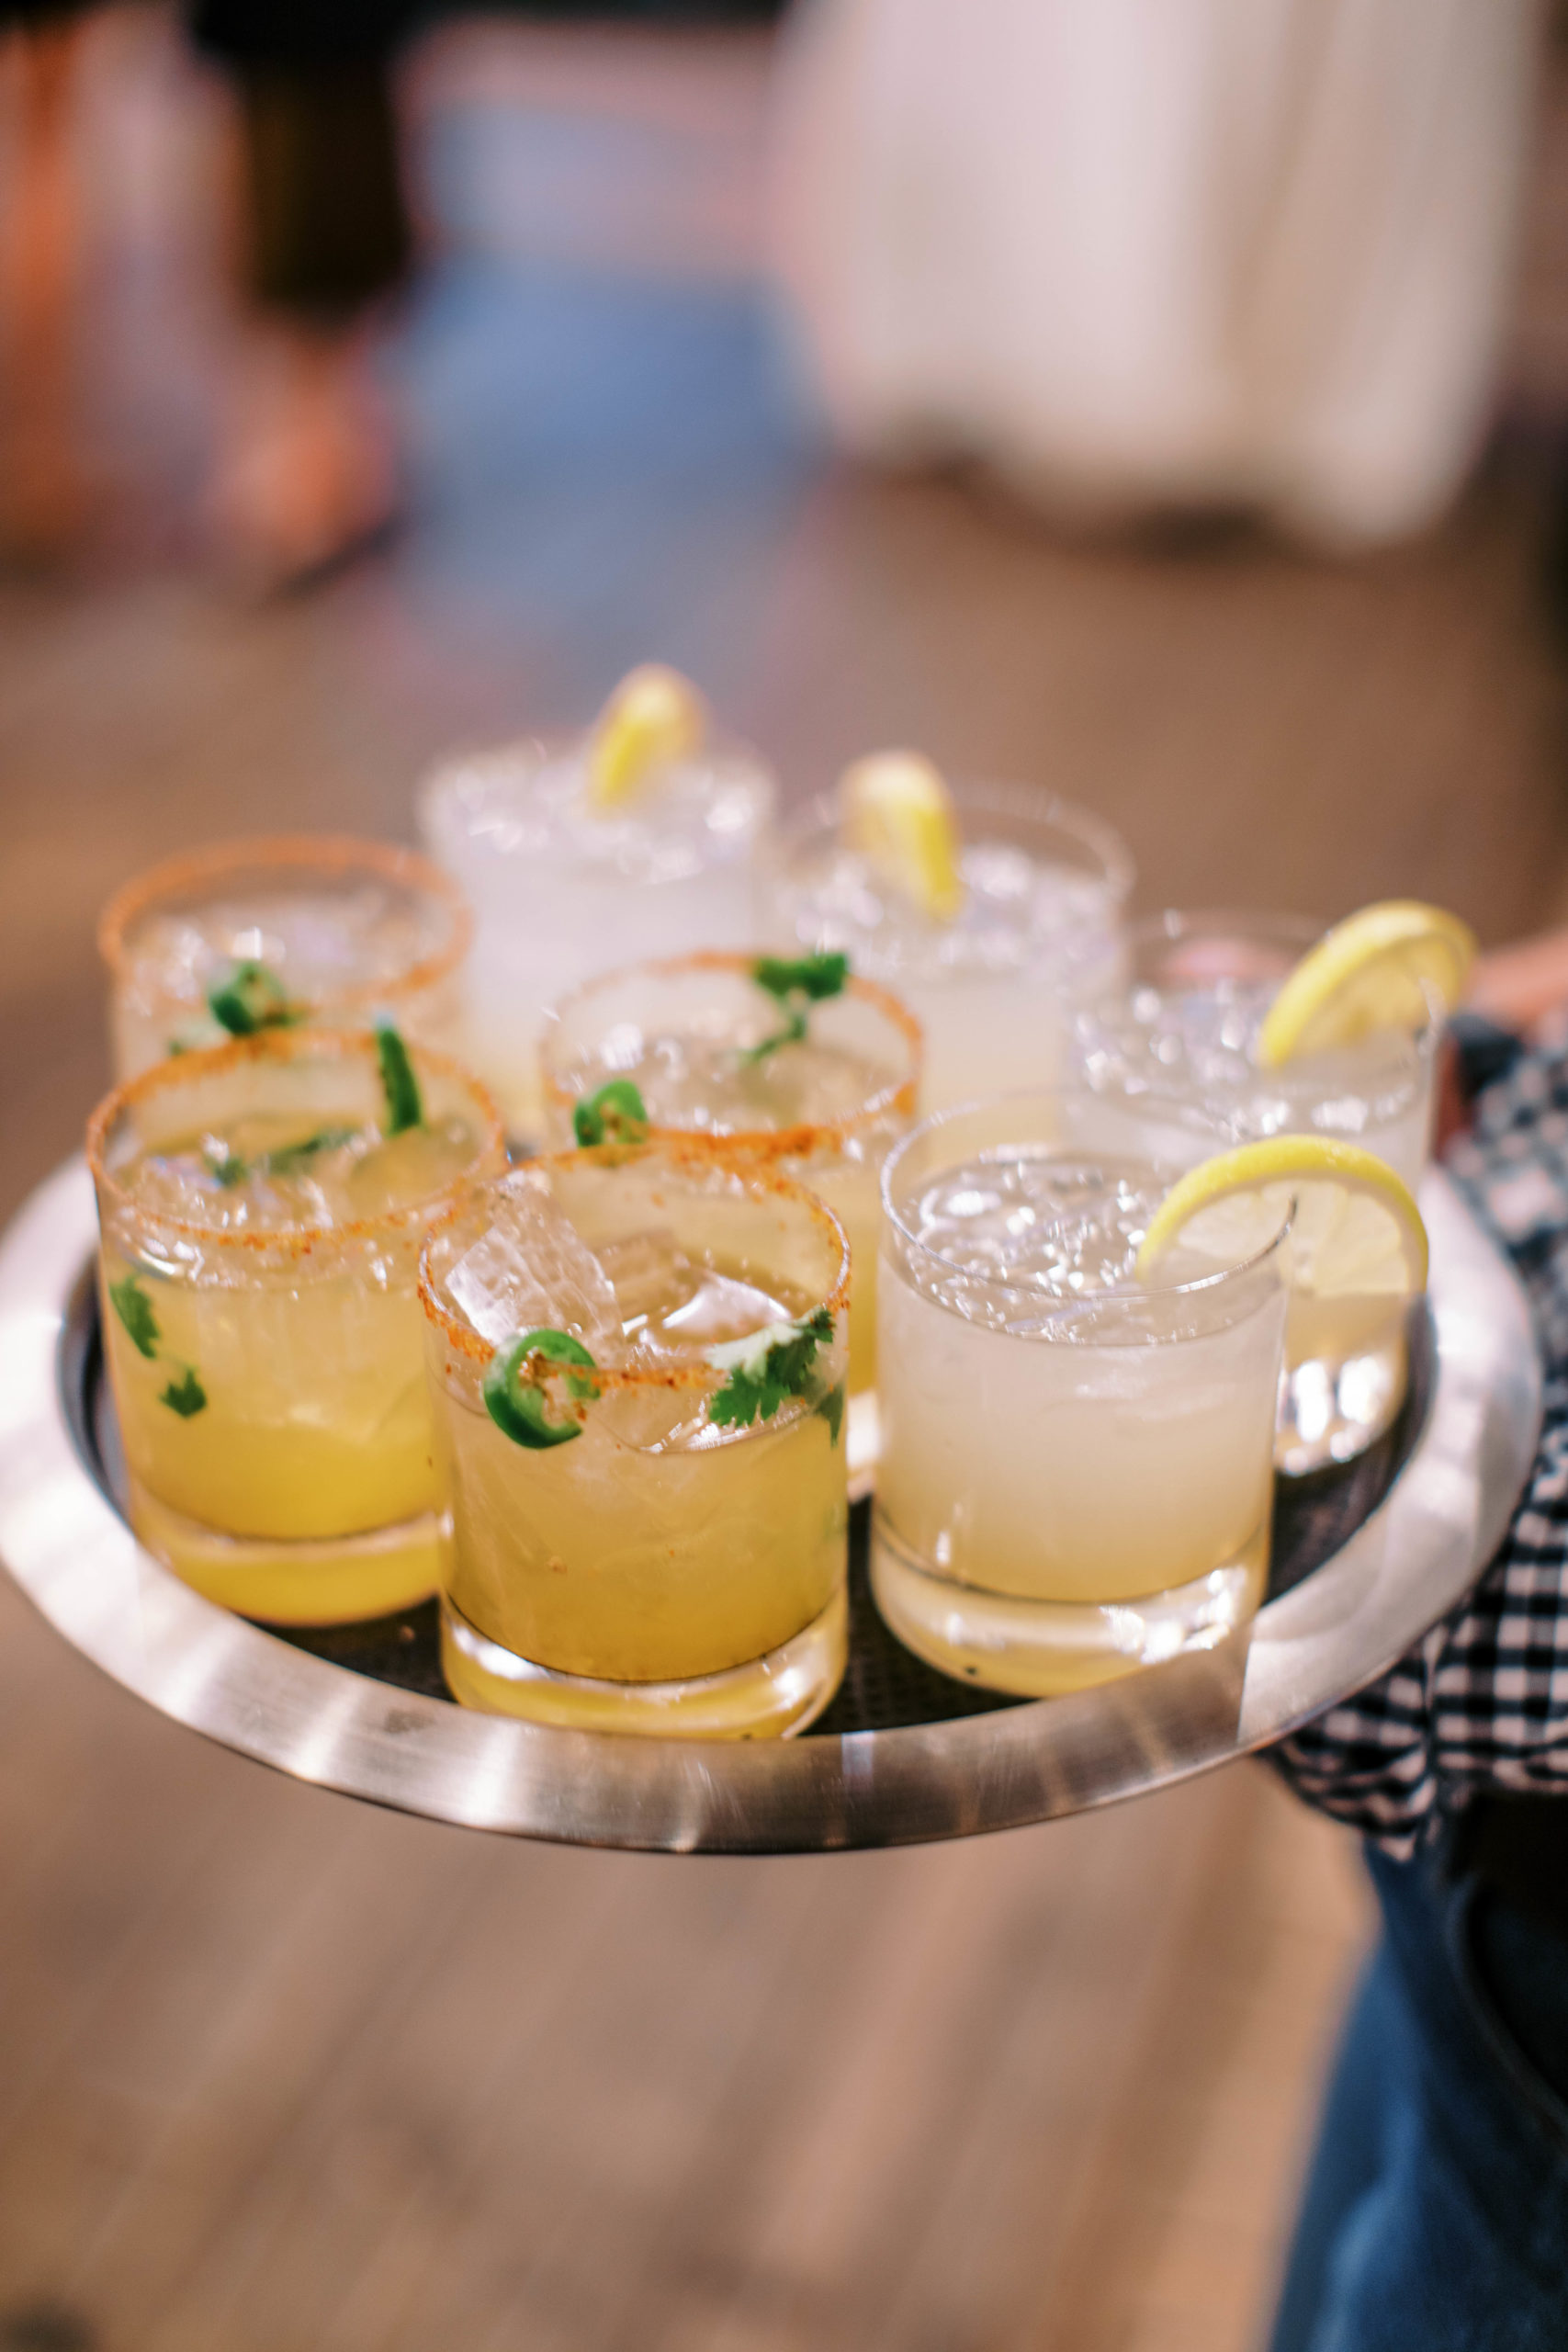 tray of signature wedding drinks at a ranch wedding in utah. photo by megan robinson photography